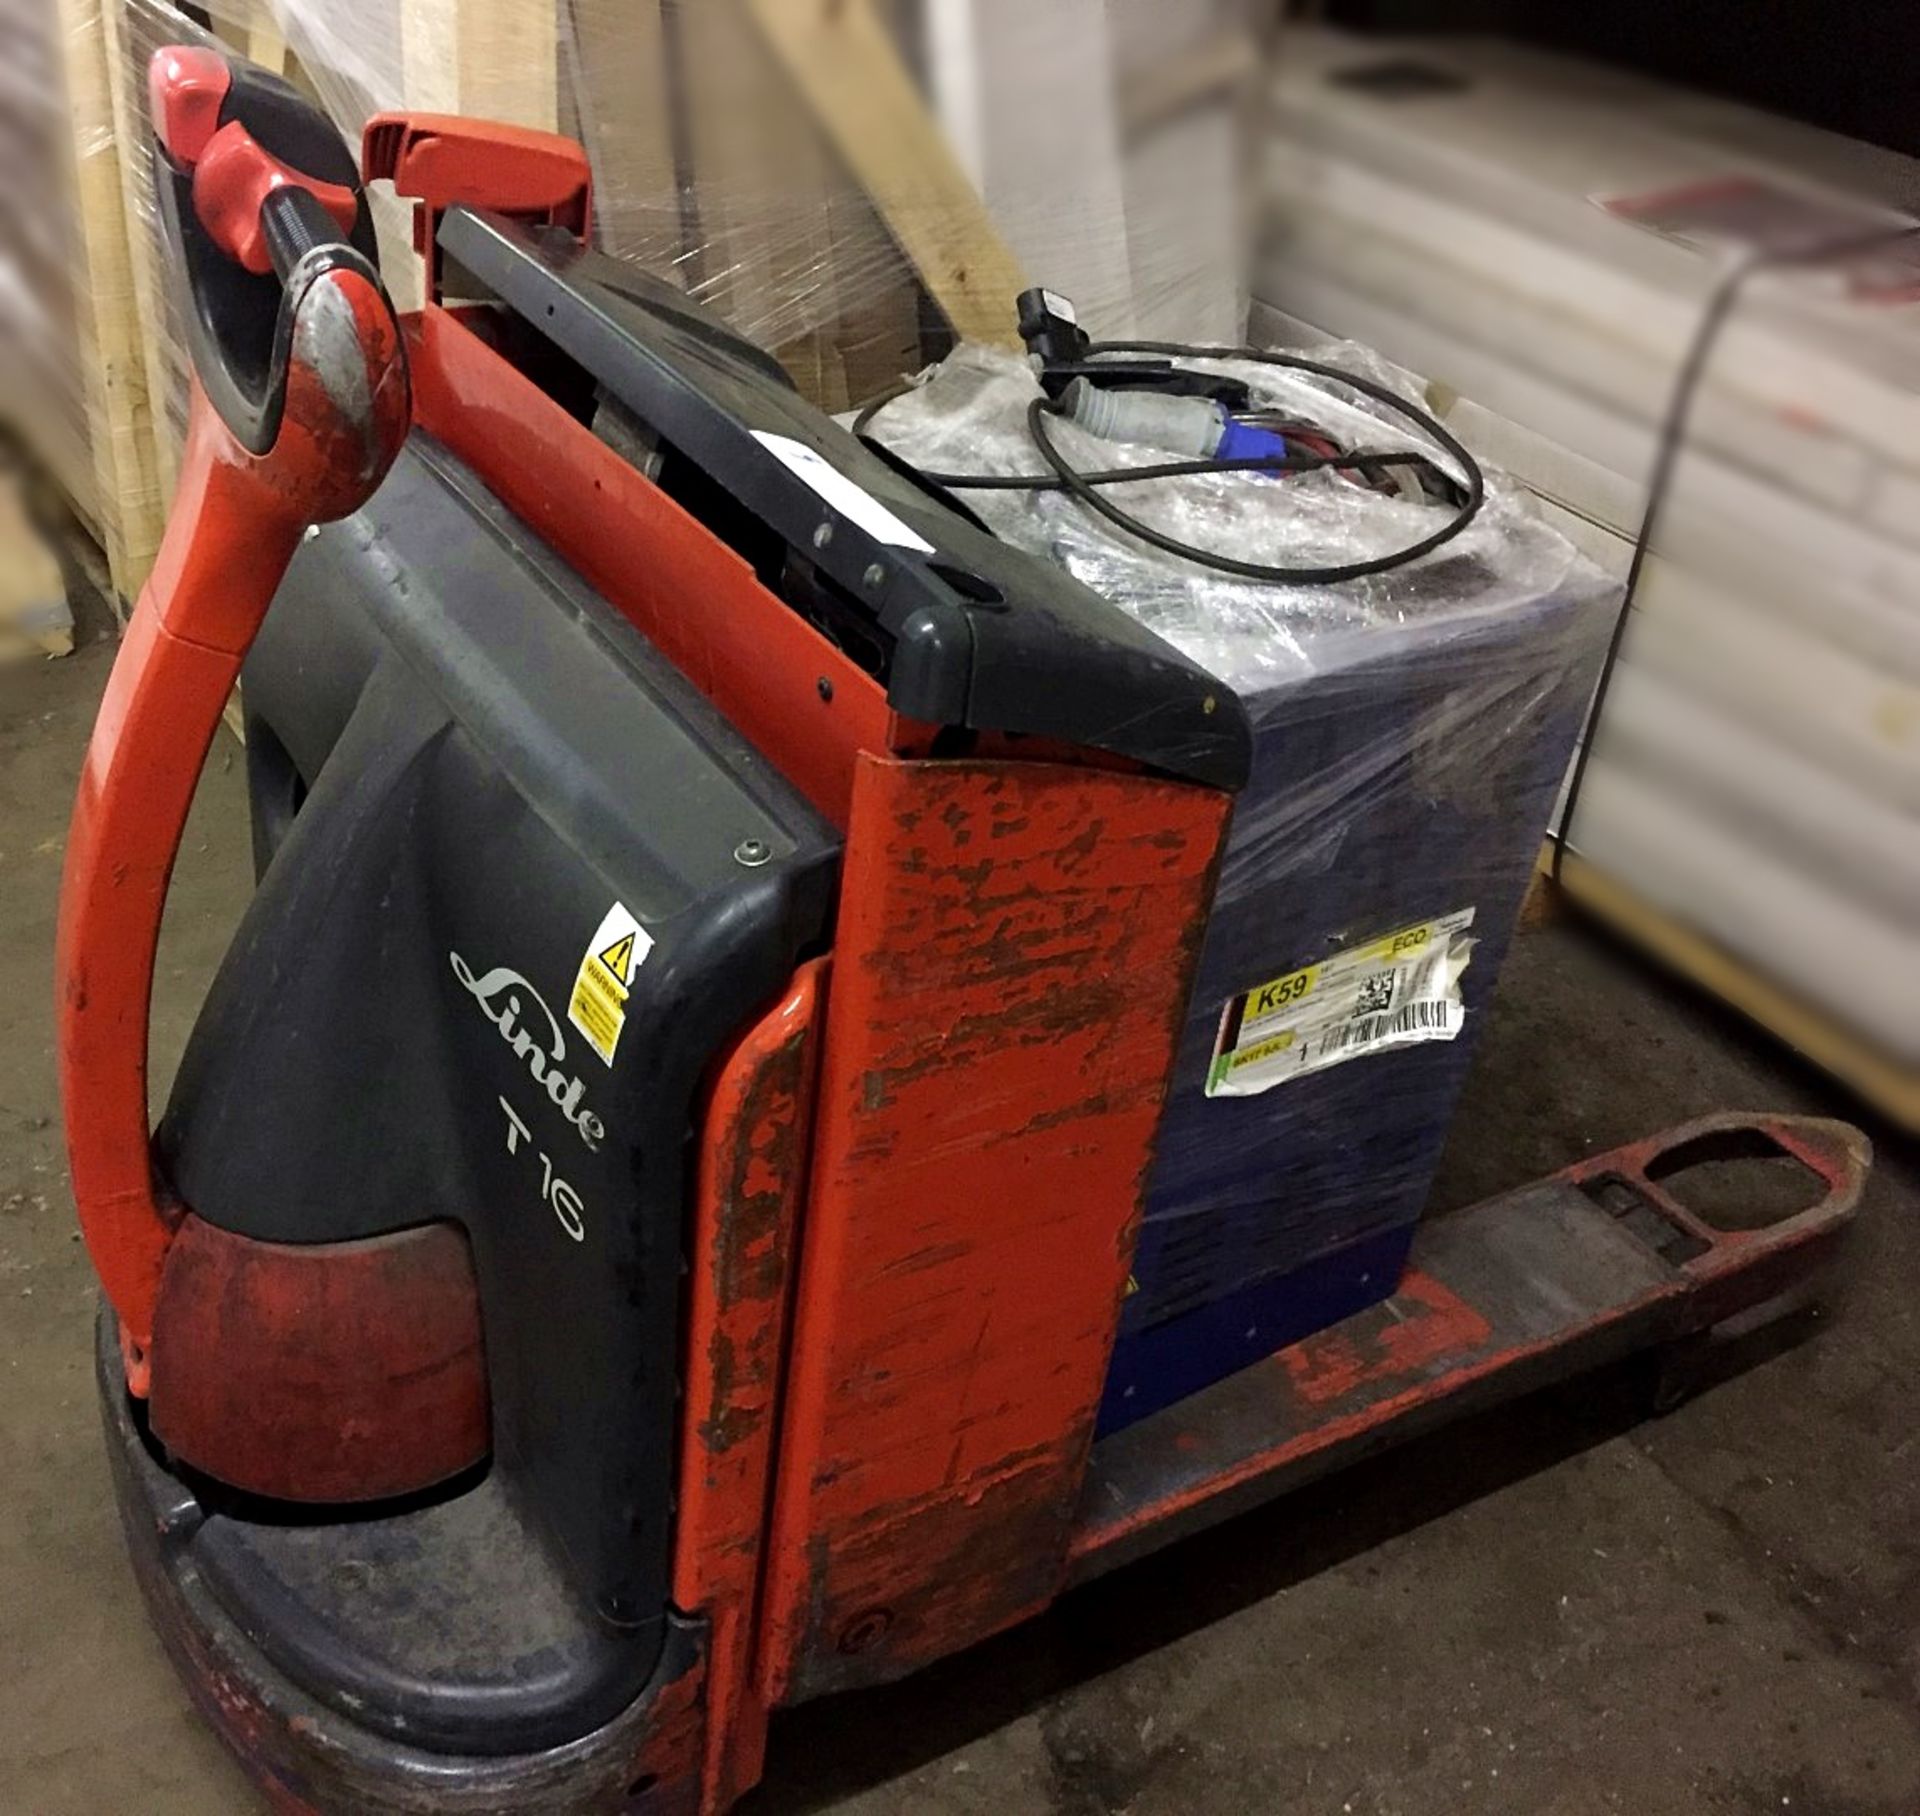 1 x Linde T16 Electric Pallet Truck - 1600kg Capacity - Tested and Working - Key and Charger